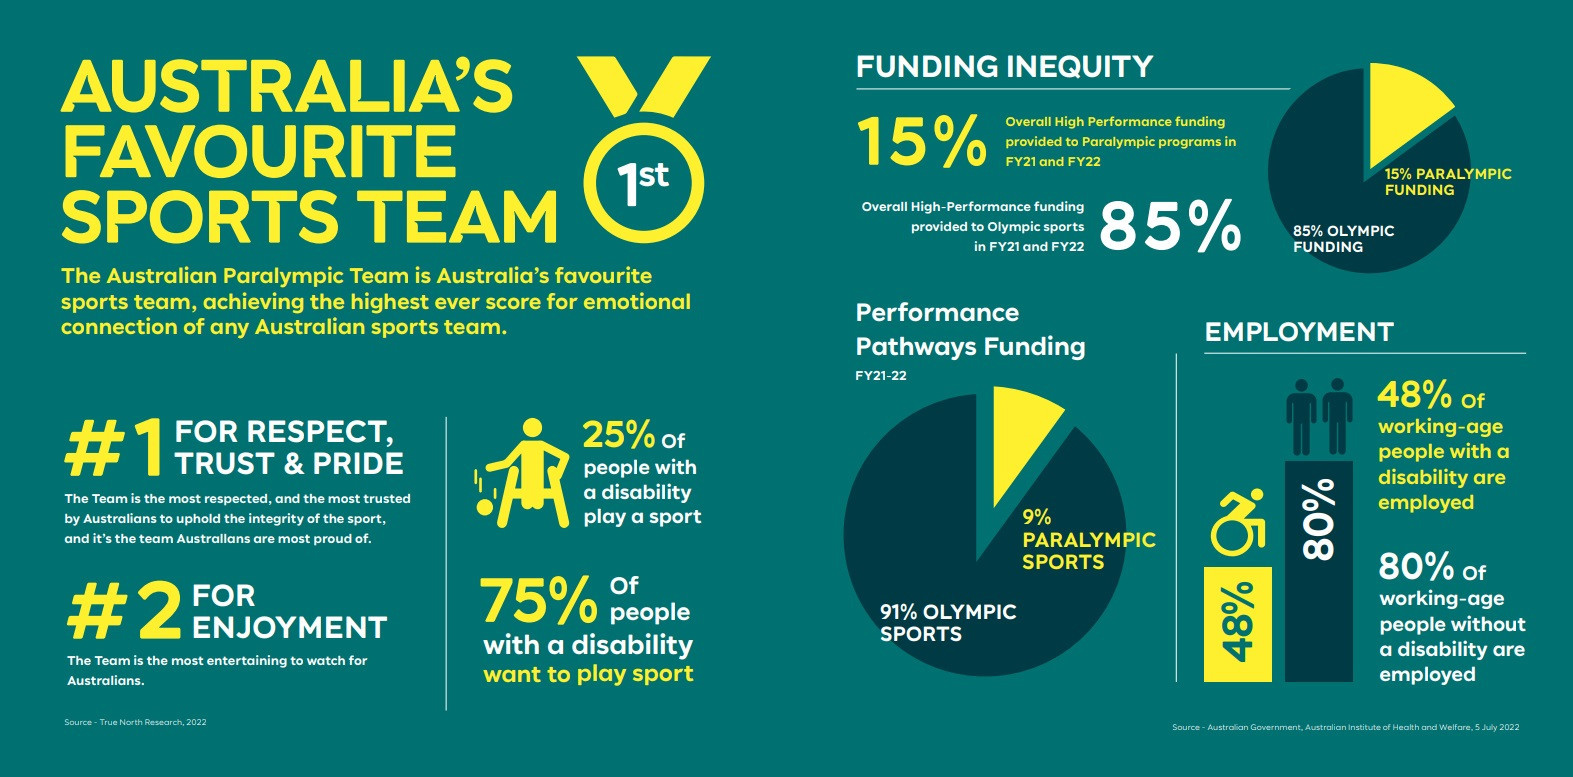 Financial inequality was addressed in Paralympics Australia's new strategy ©Paralympics Australia